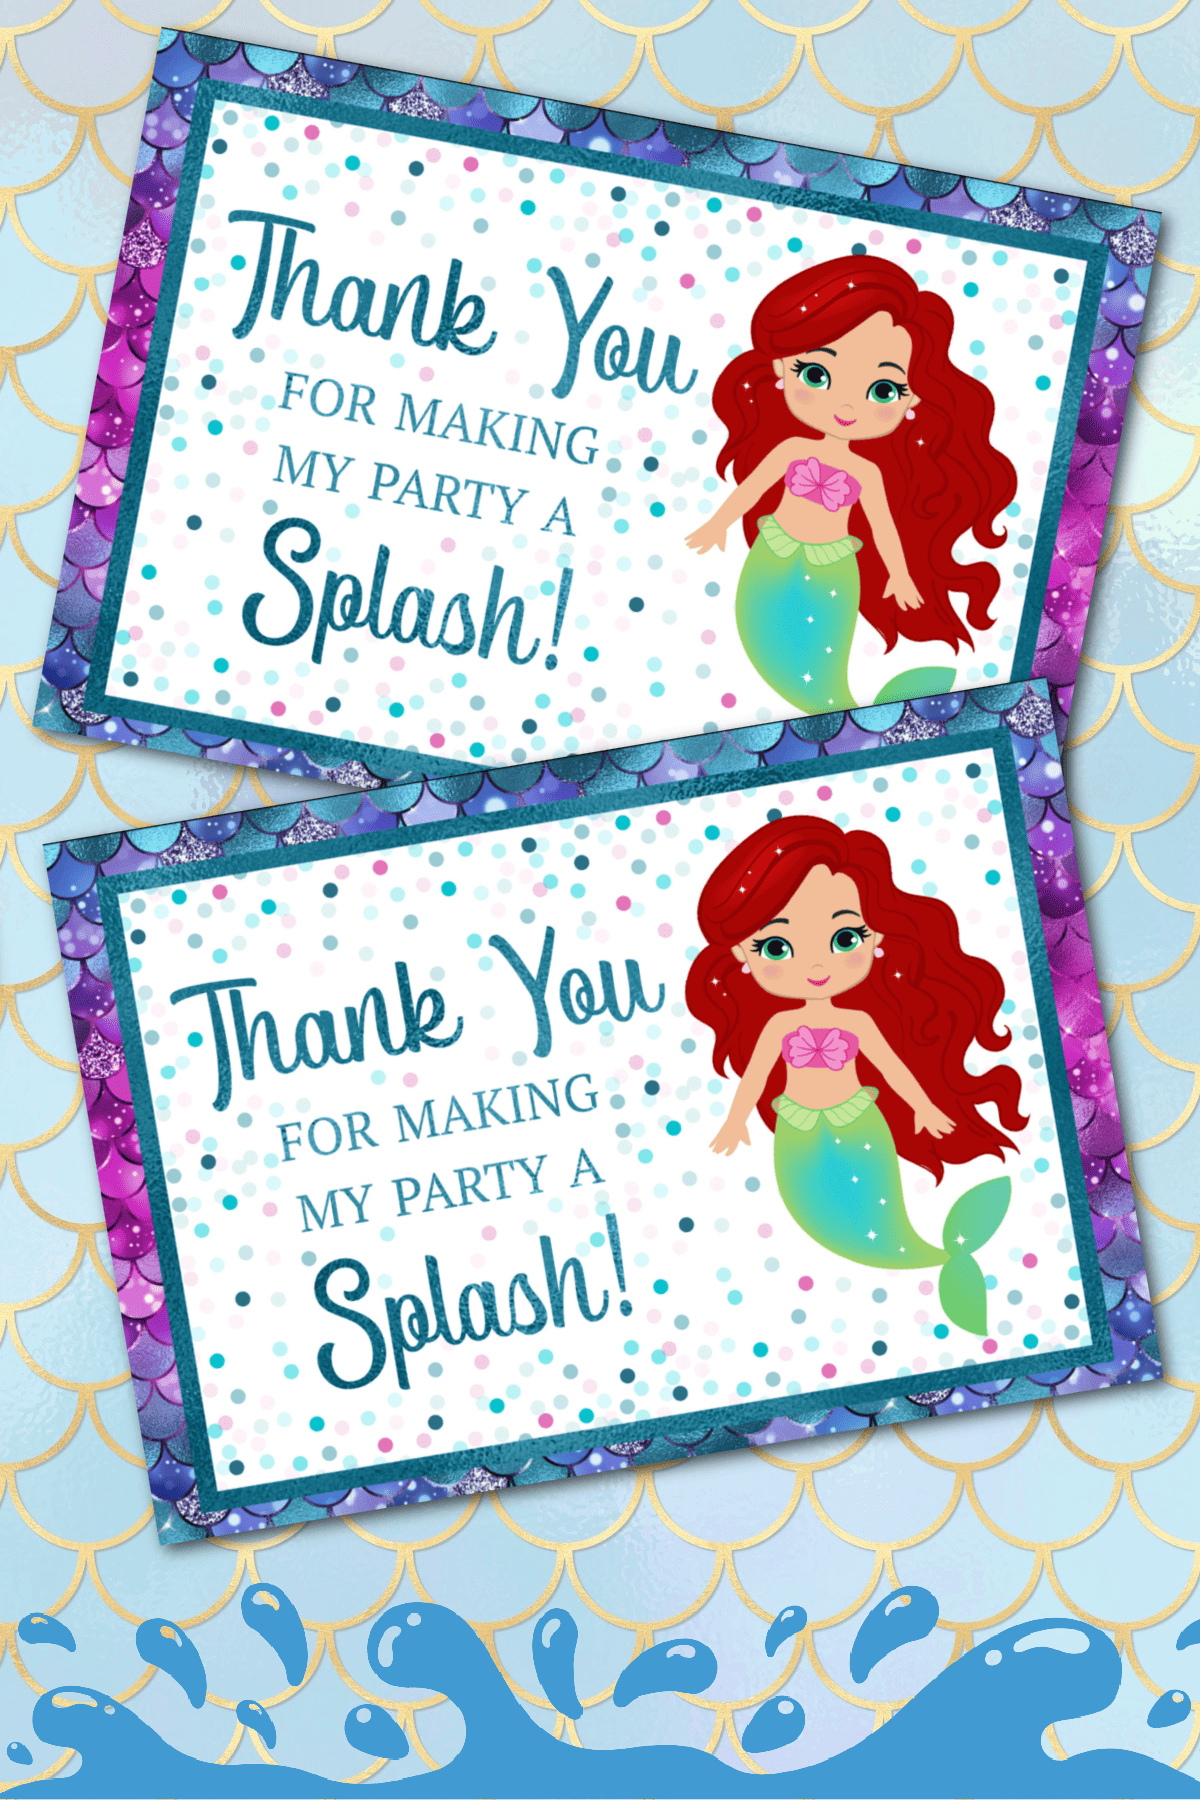 Mermaid Thank You Card on fish scale background